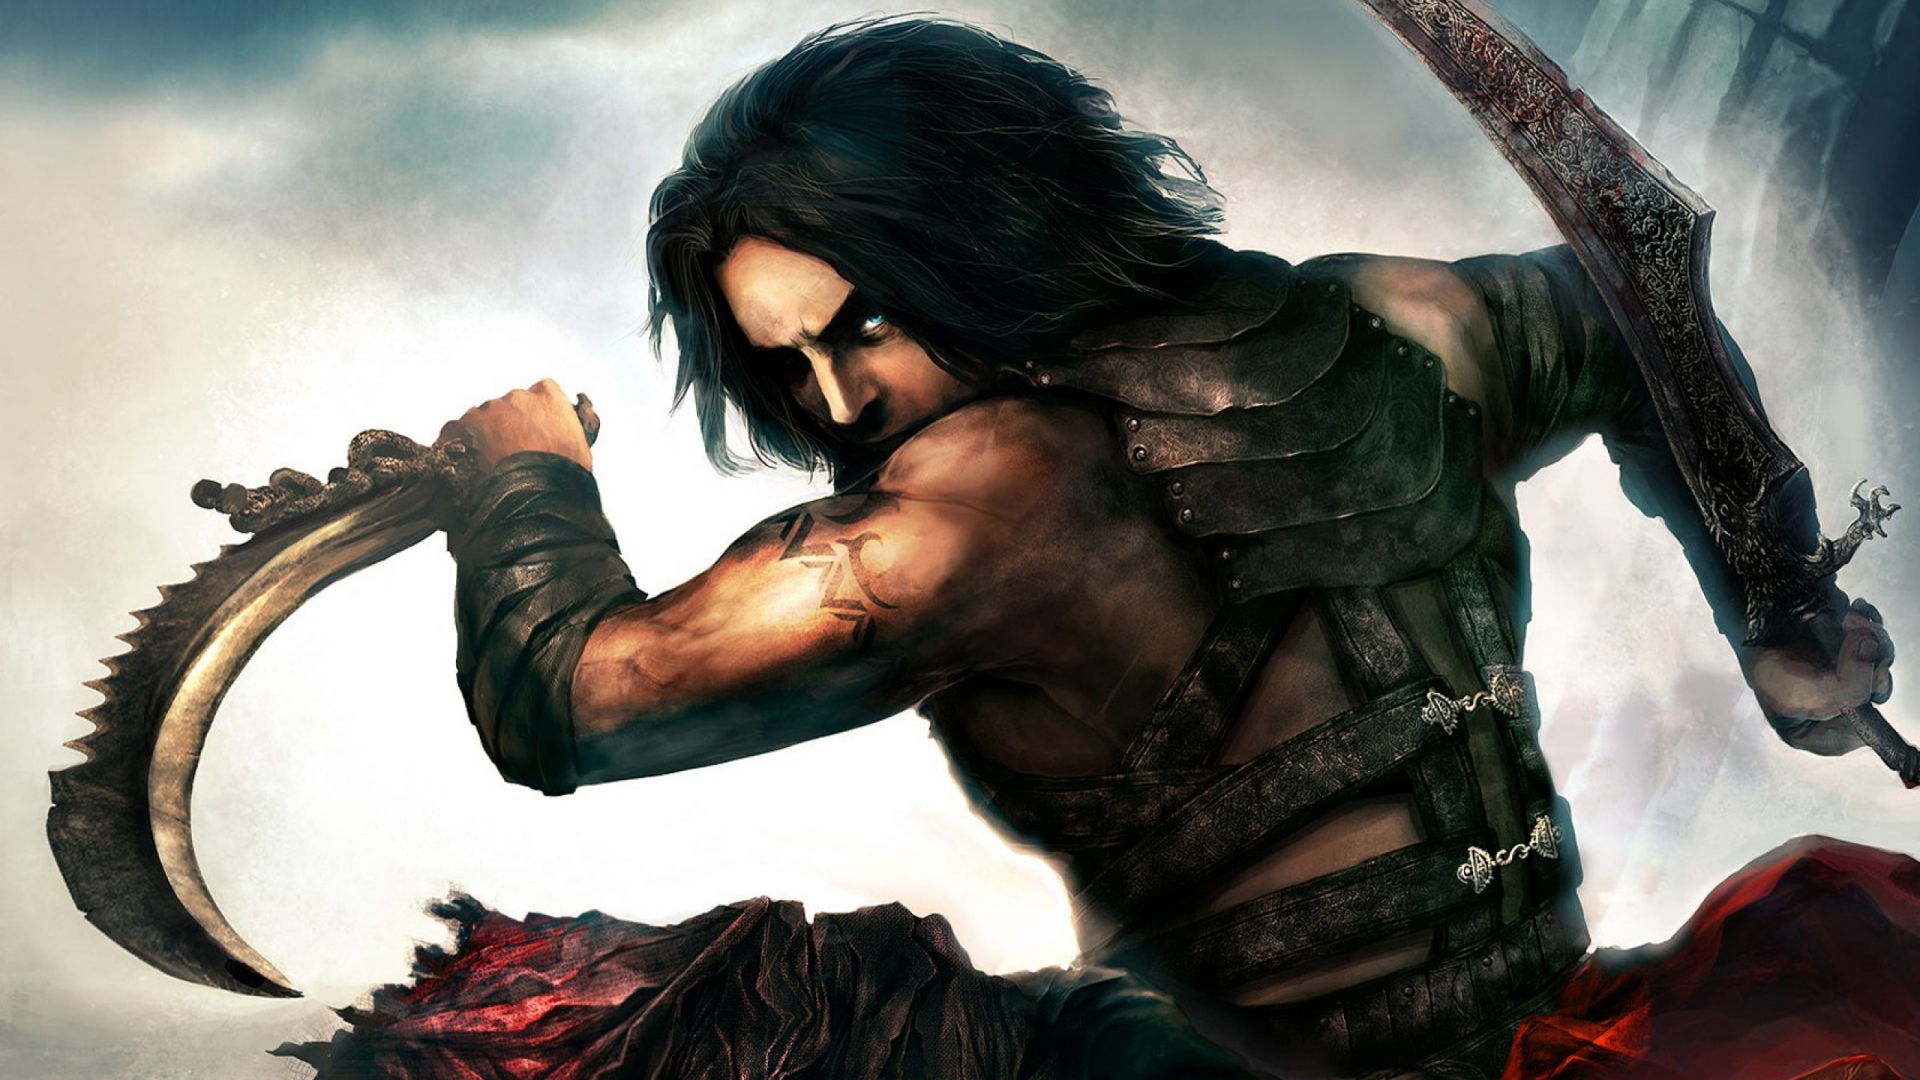 Prince of Persia Warrior Within for 1920 x 1080 HDTV 1080p resolution